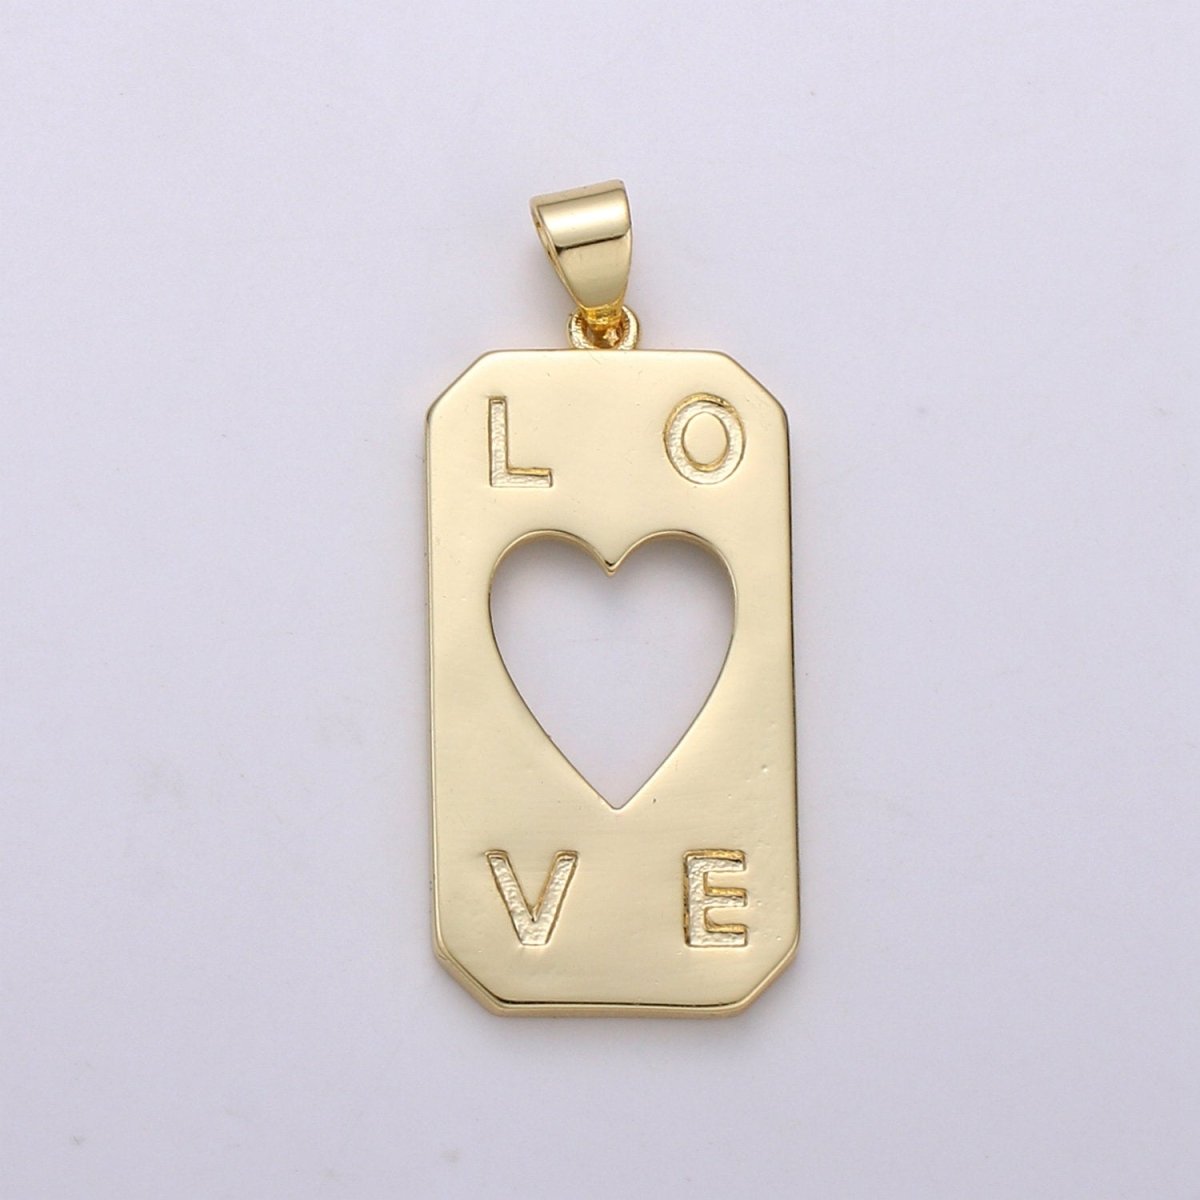 14K Gold Filled Charm Hollow out Heart Pendant LOVE Words Charm Tag Jewelry for Necklace Bracelet Earring Component Supply J-126 - DLUXCA